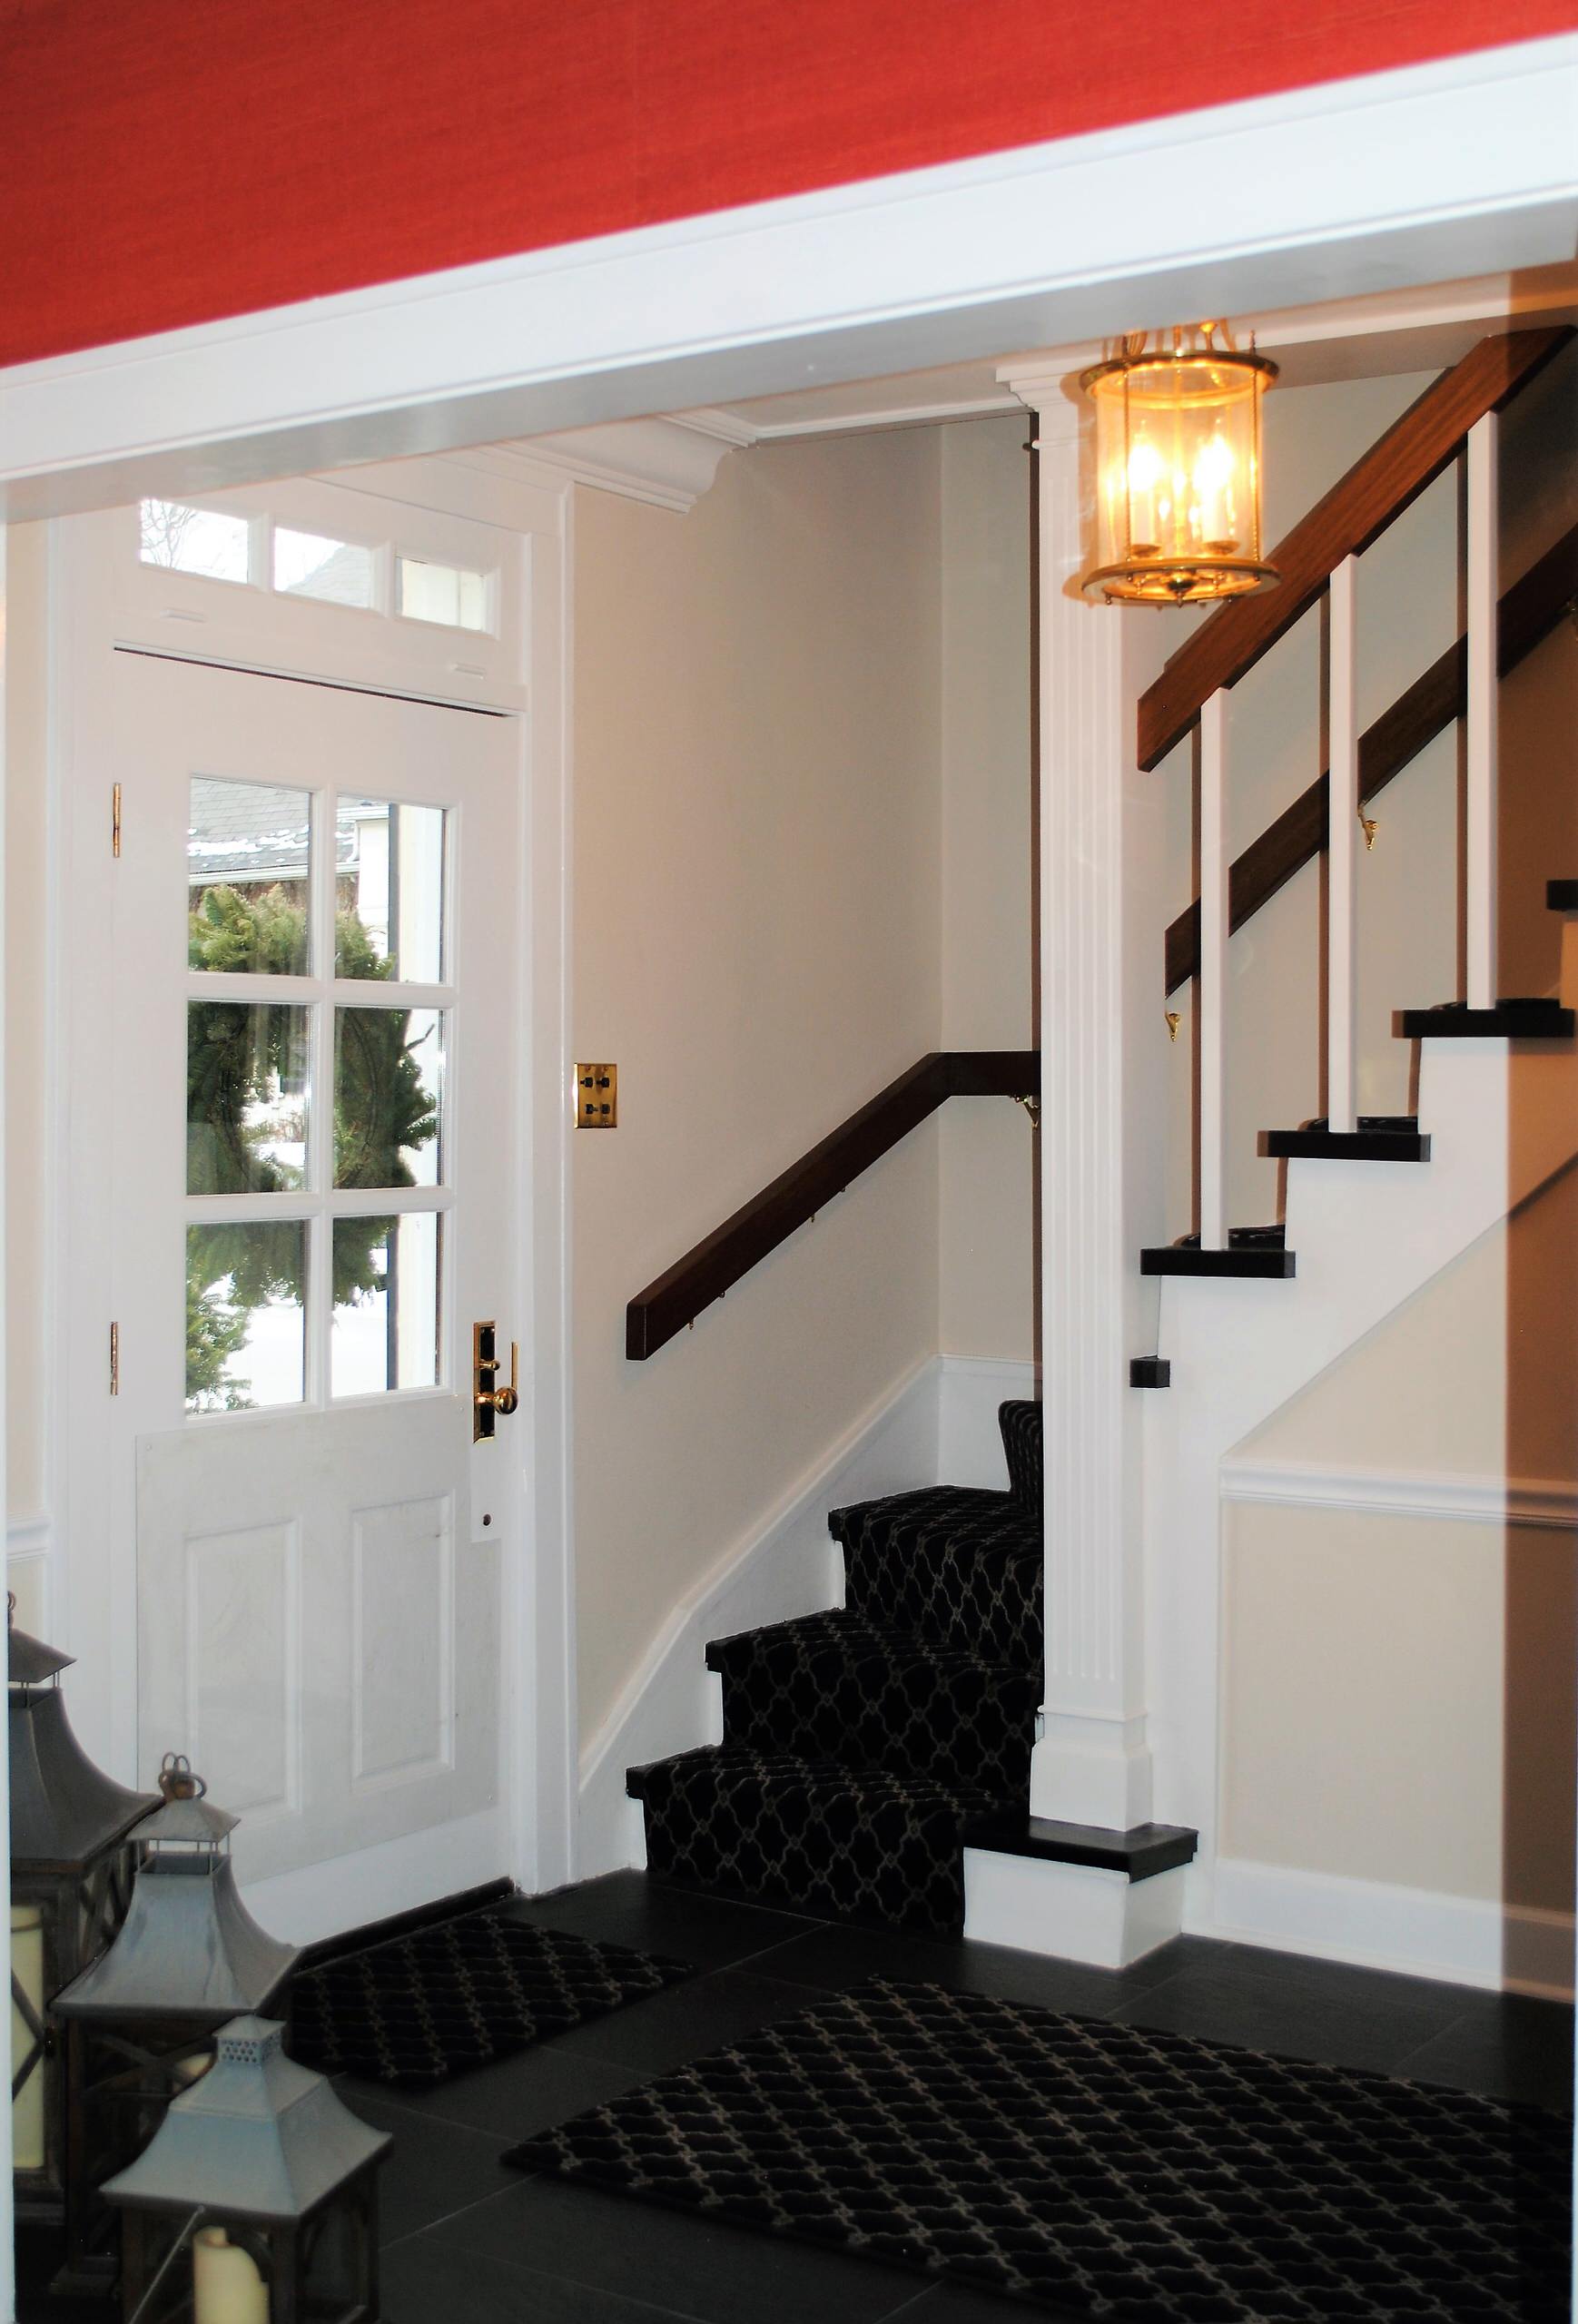 Lake Forest Home - Fireplace, Staircase and Hallway